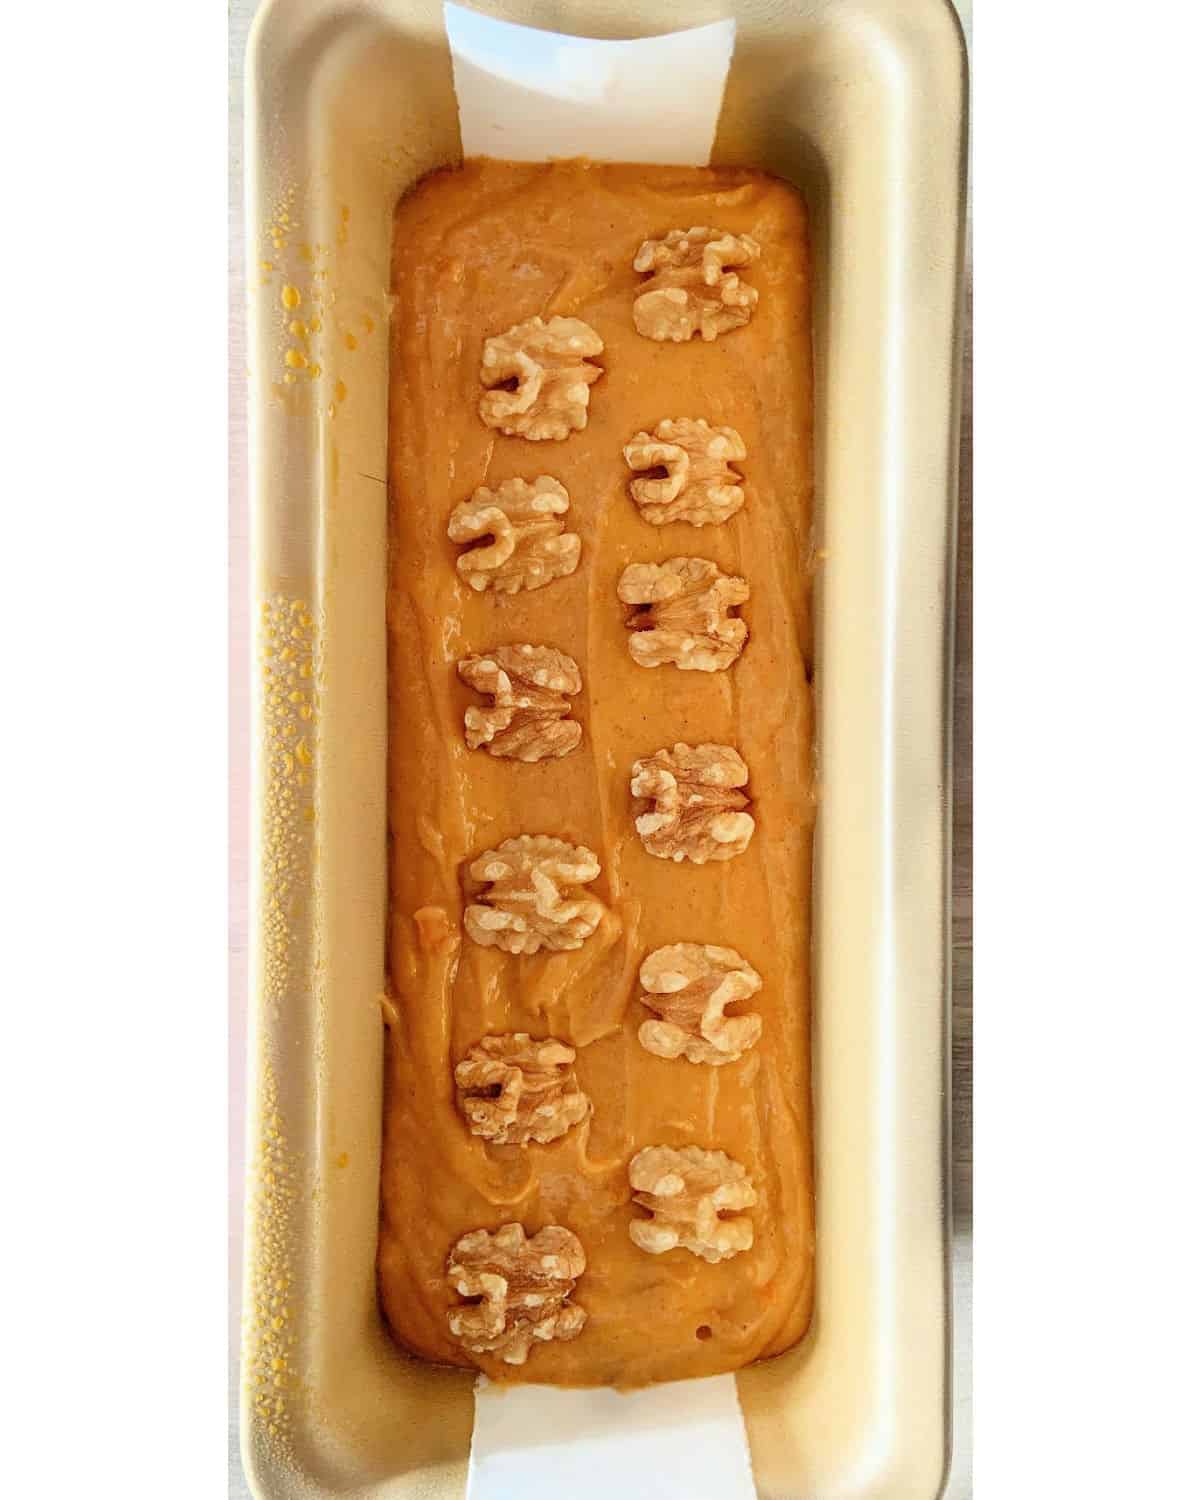 Pumpkin bread batter with walnuts on a loaf pan on a white surface.